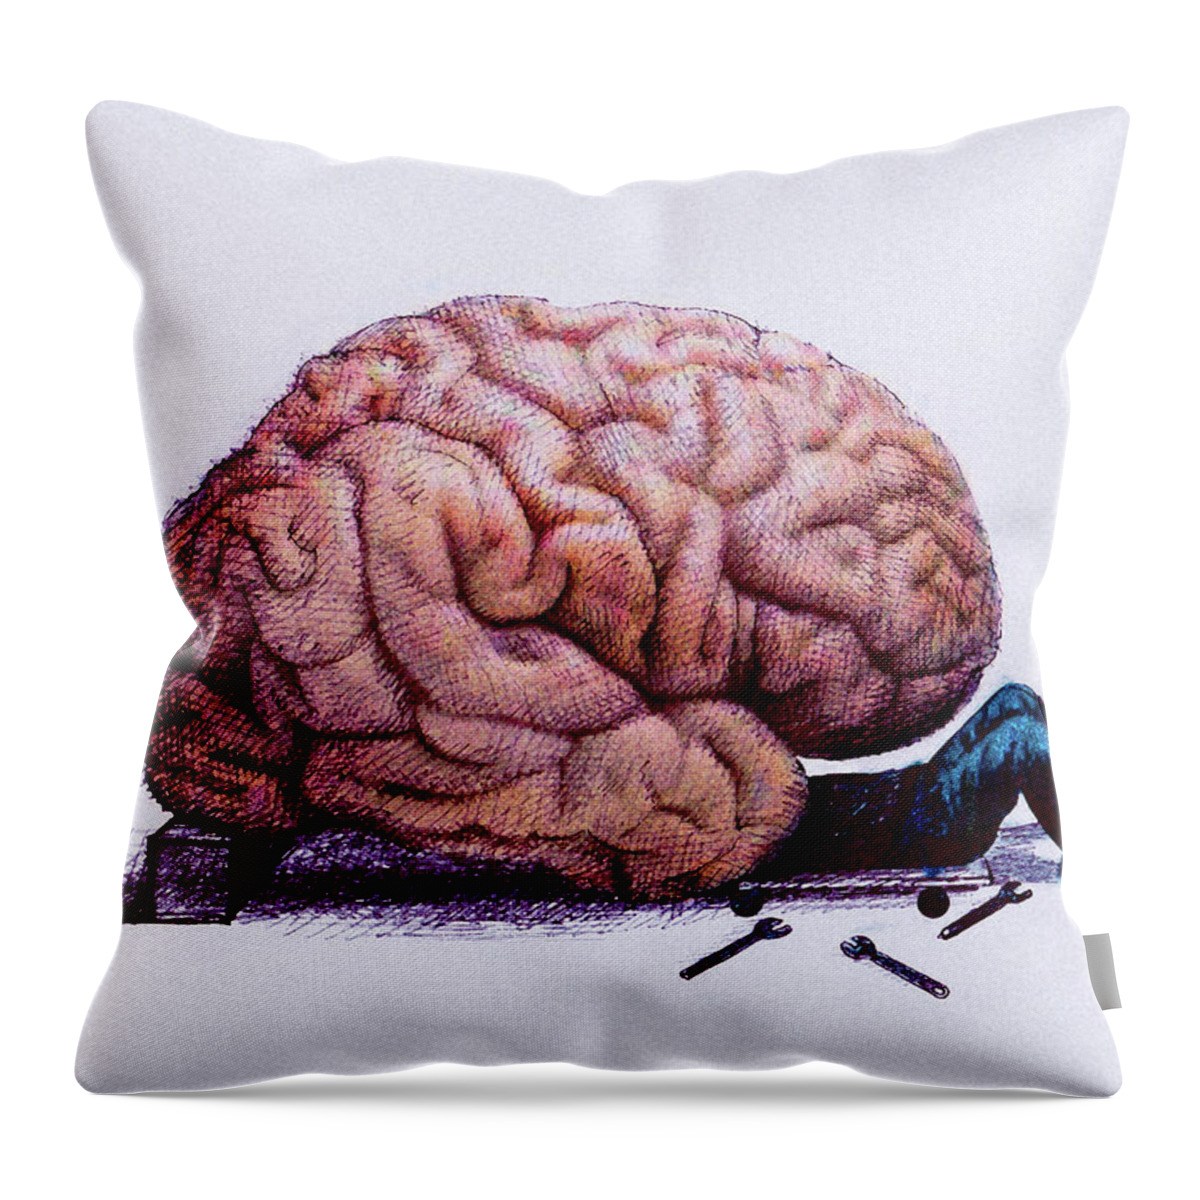 Adult Throw Pillow featuring the photograph Mechanic Repairing Brain by Ikon Ikon Images